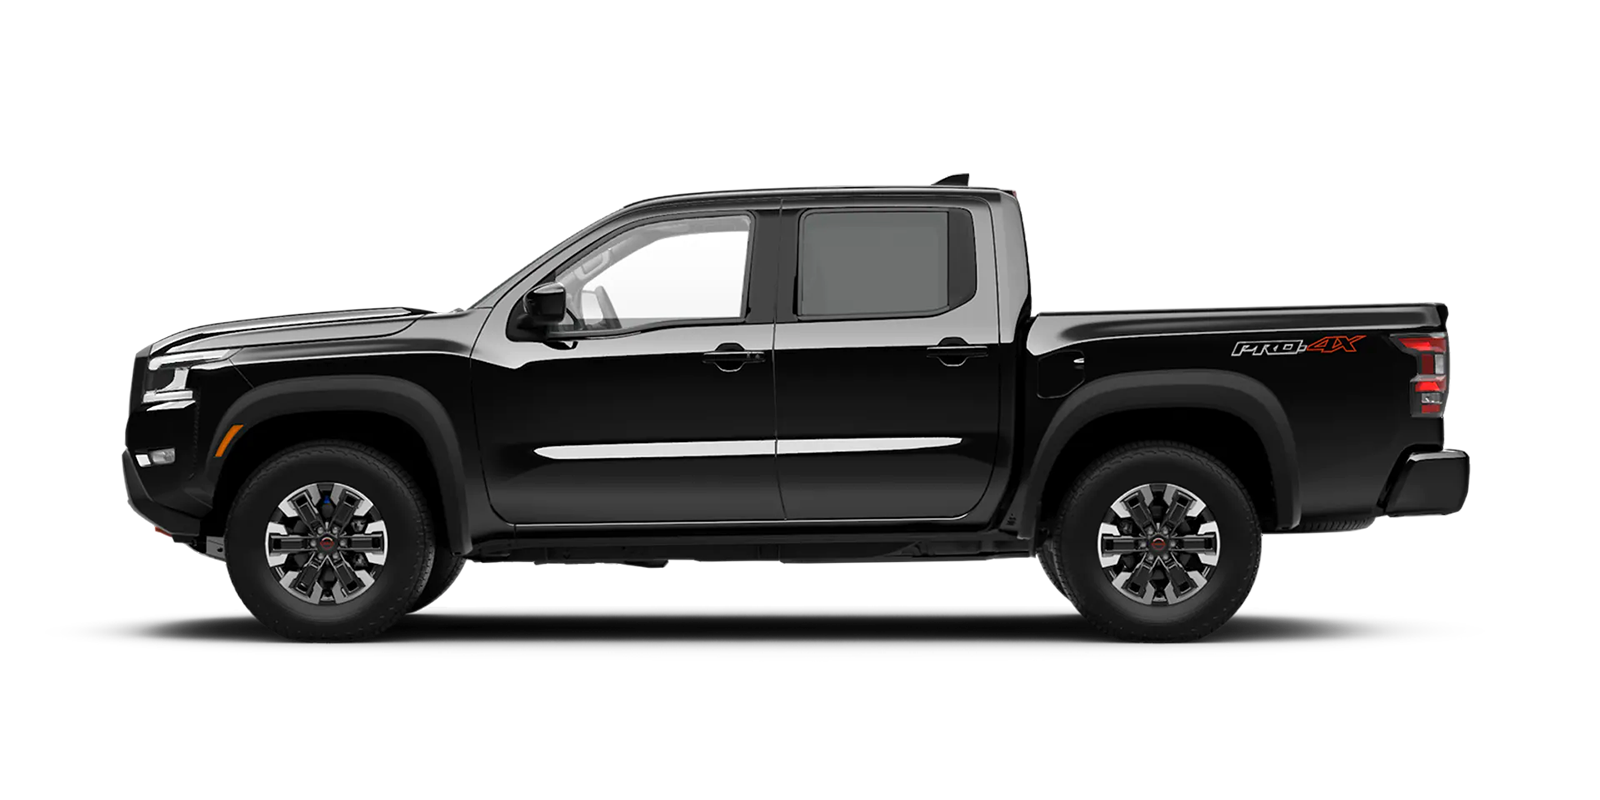 2022 Frontier Crew Cab Pro-4X 4x4 in Super Black | Wallace Nissan of Kingsport in Kingsport TN